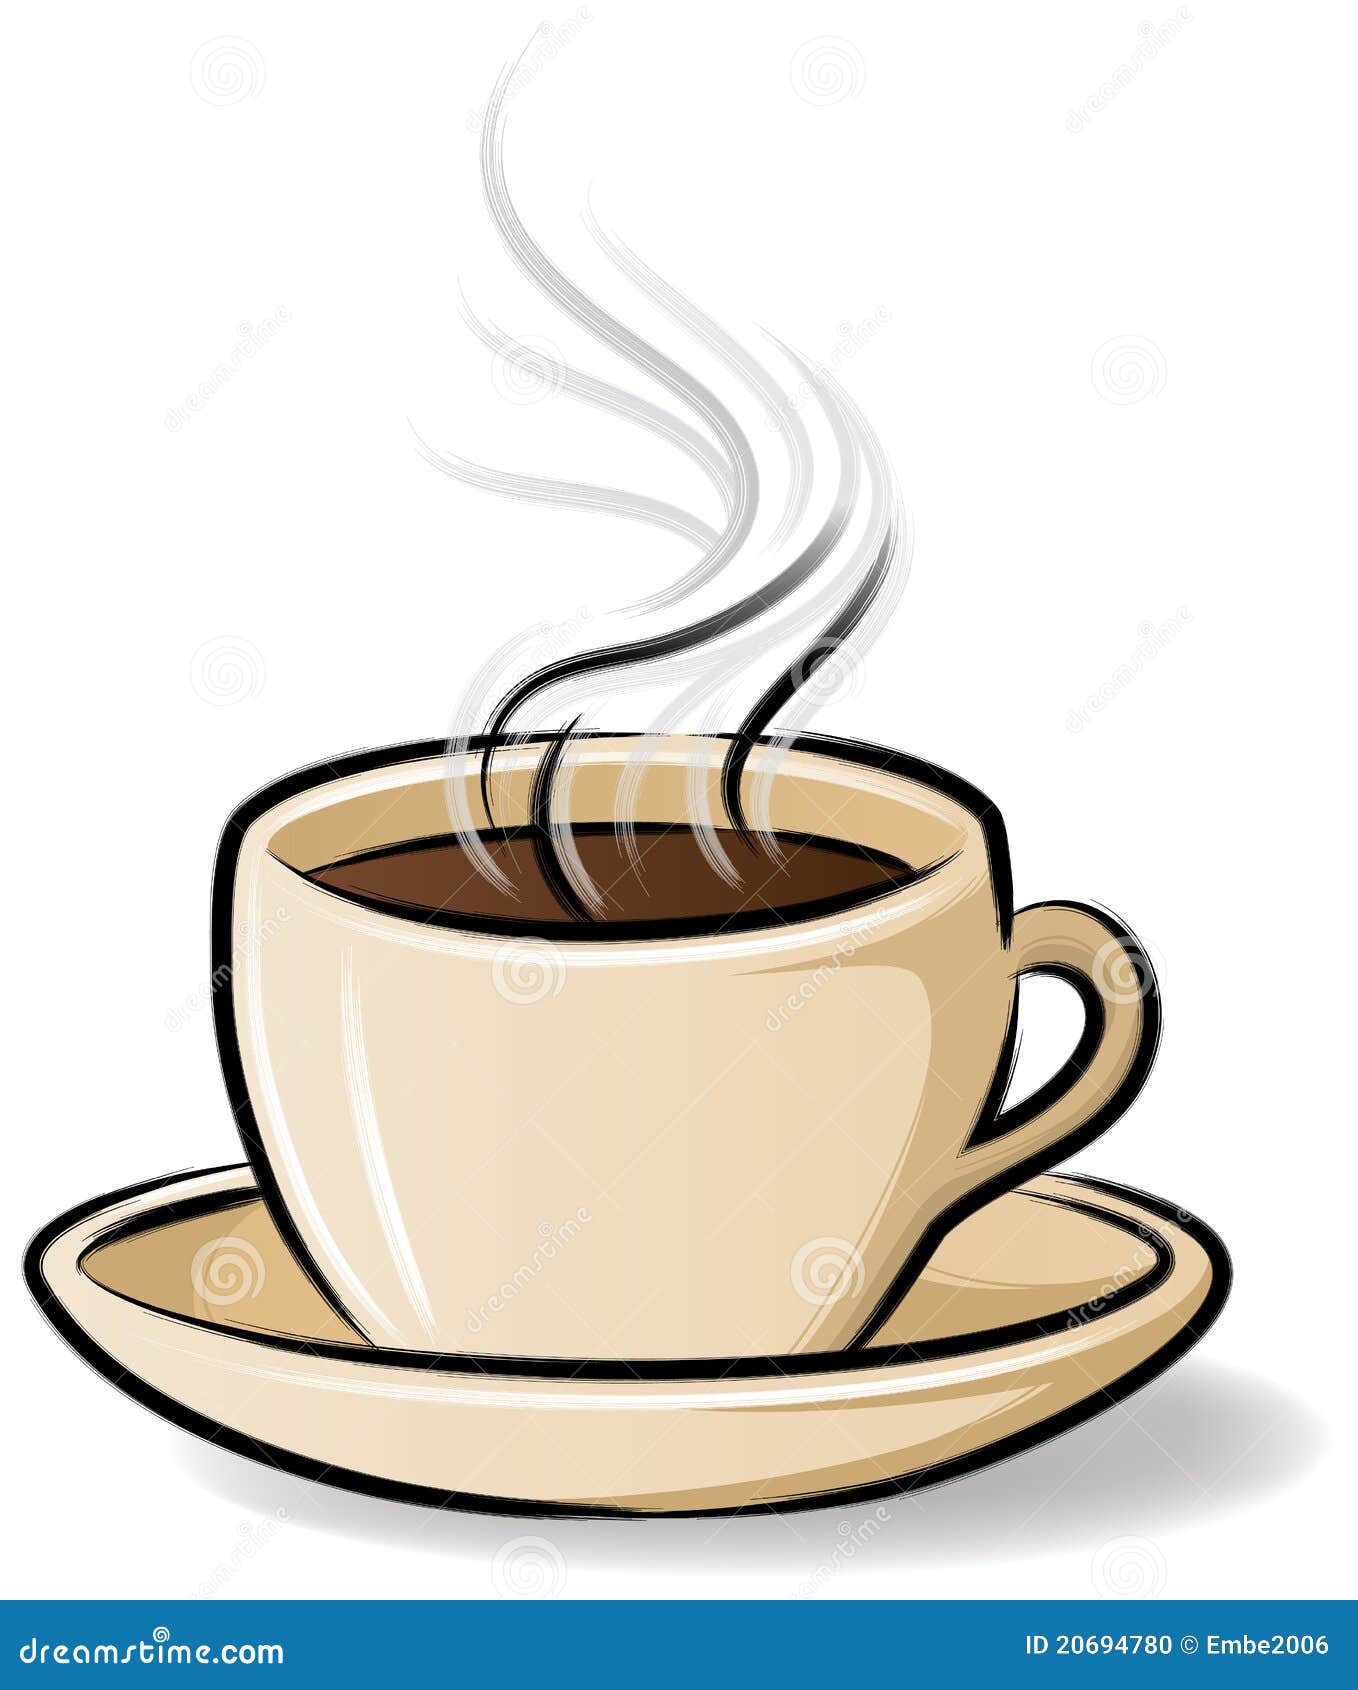 steaming cup of coffee clipart - photo #9